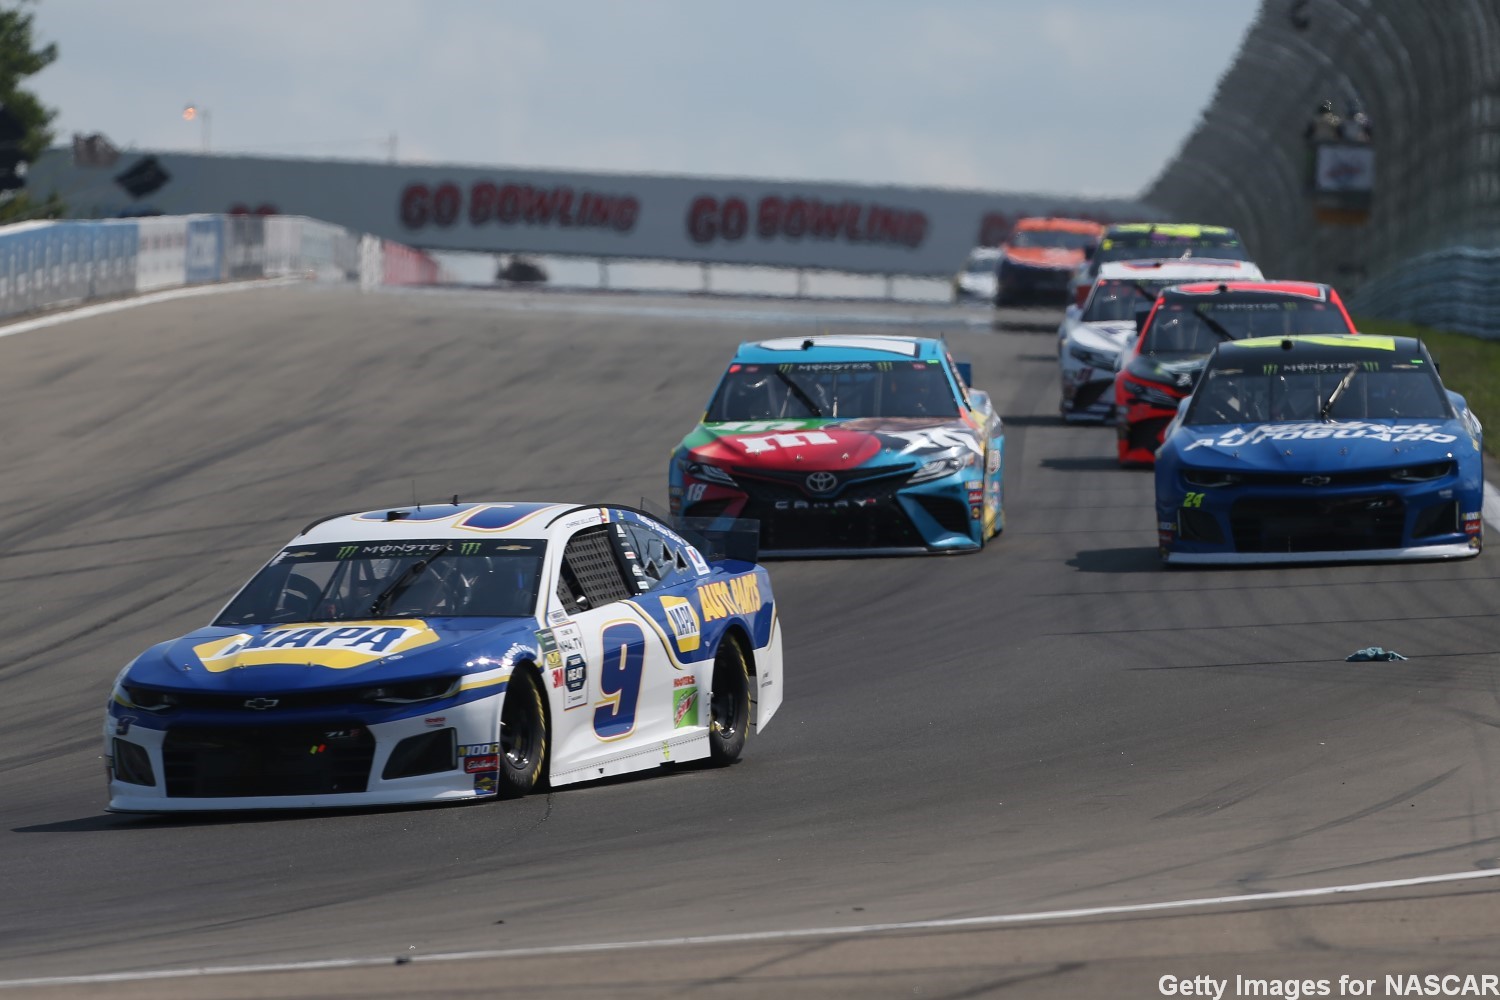 Chase Elliott leads while Kyle Busch dives to the inside for a pass for 2nd